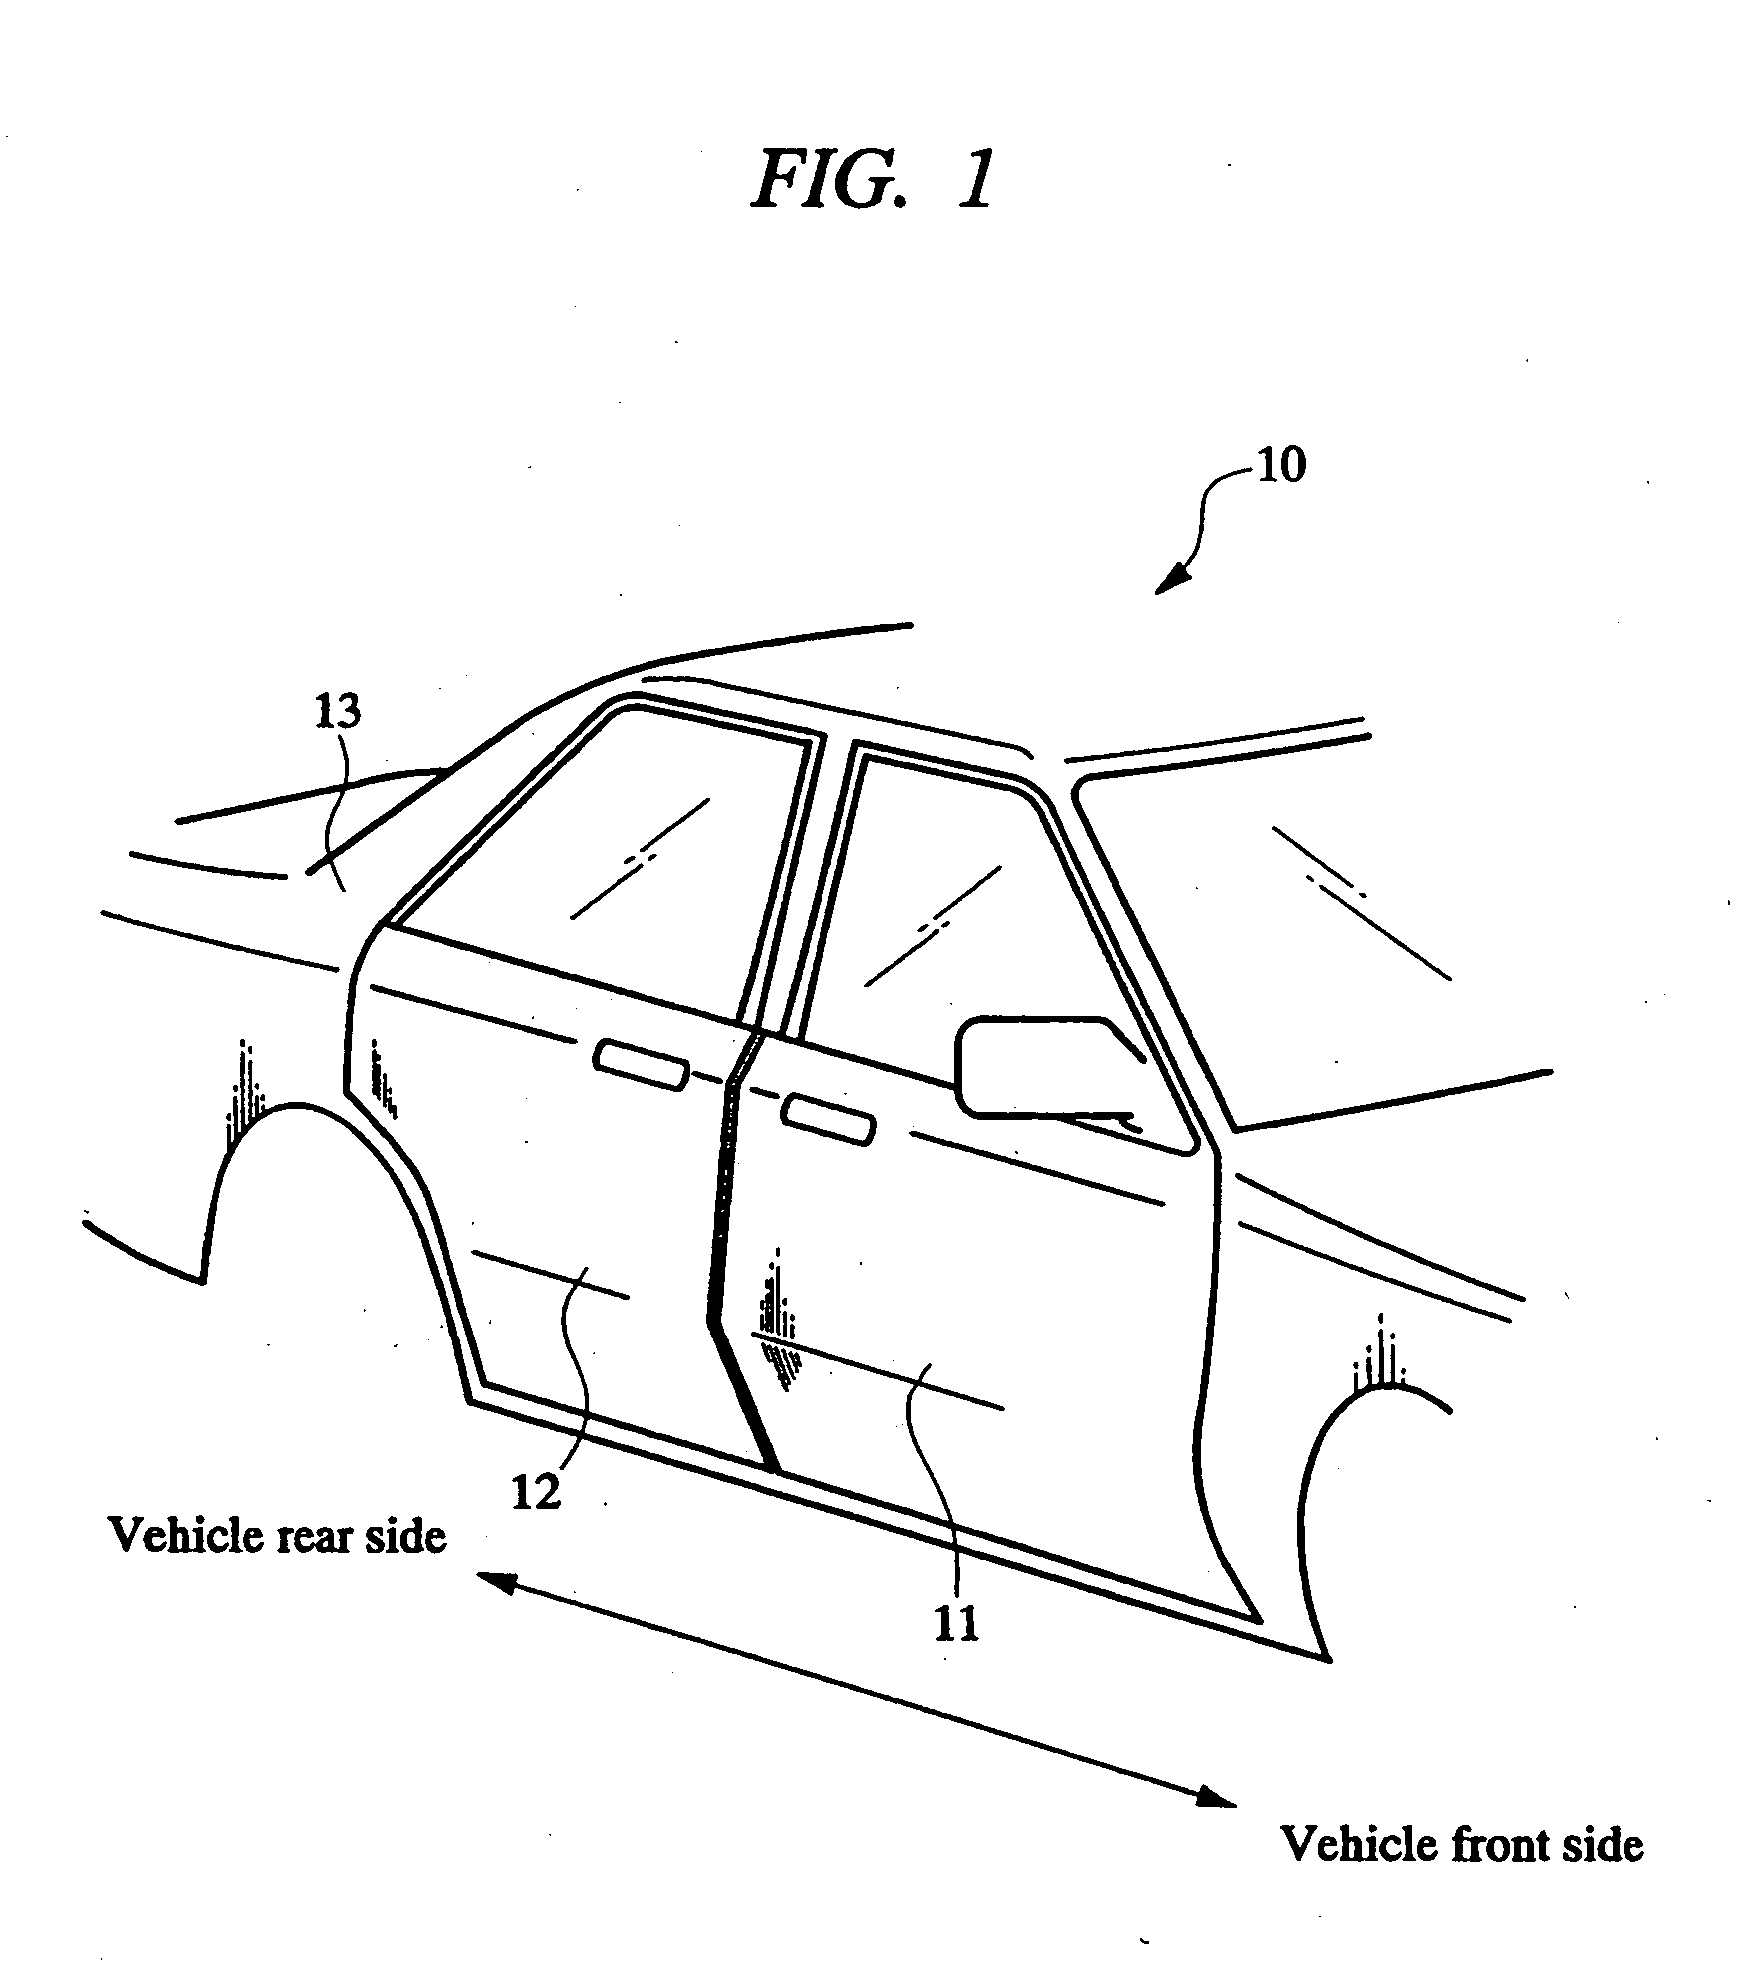 Vehicle door opening and closing structure